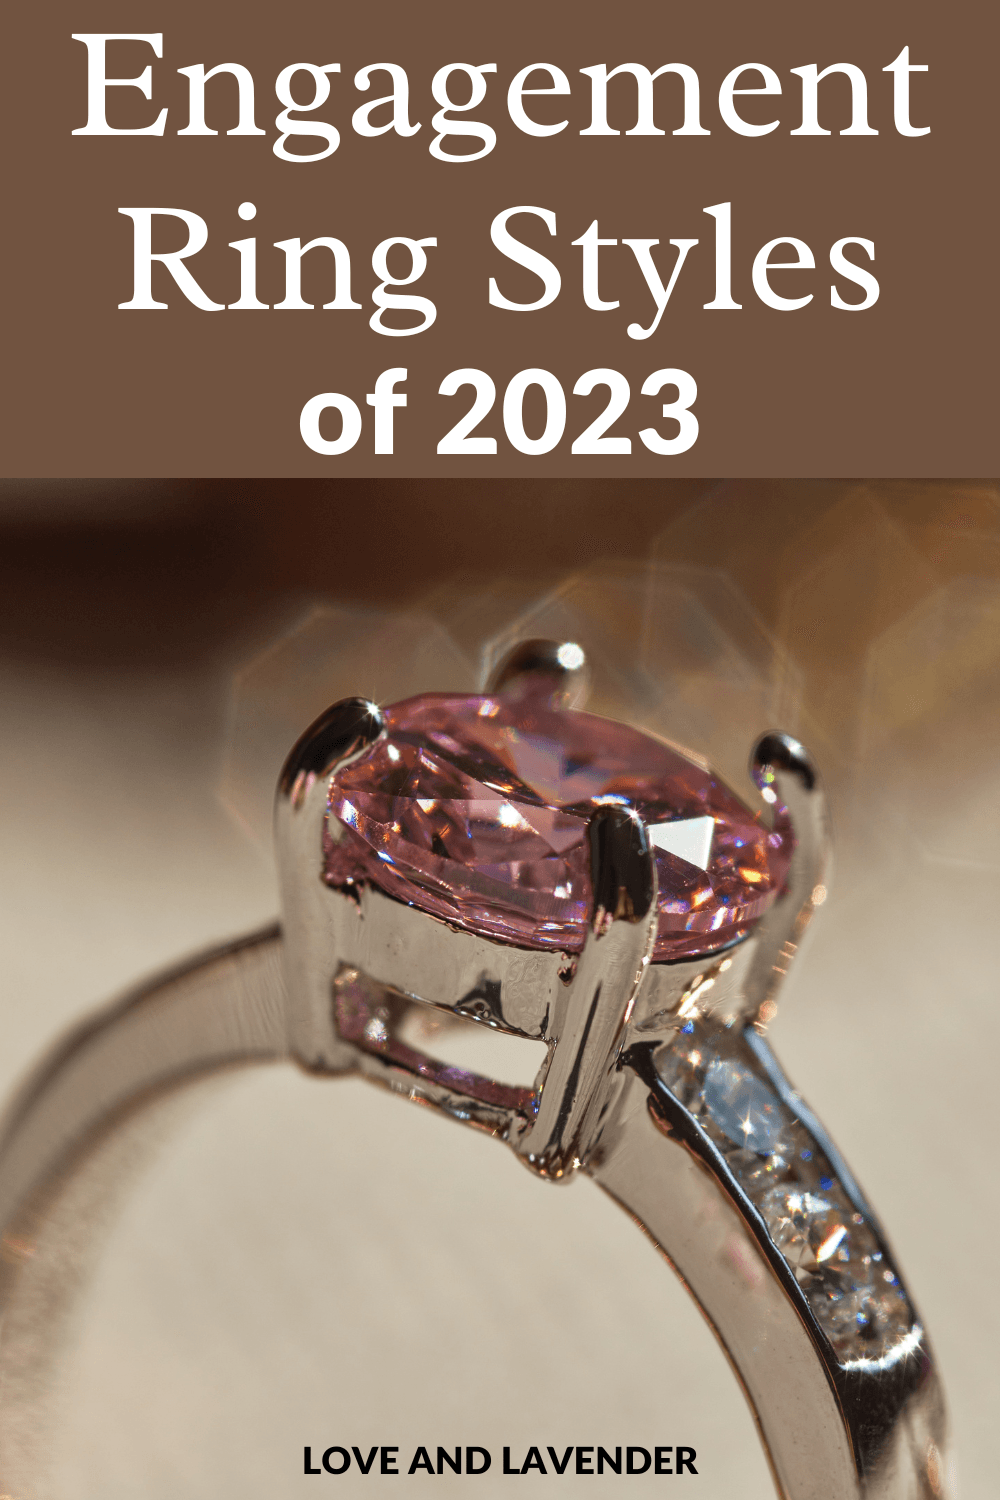 If you are planning to get engaged soon, a diamond engagement ring is an essential part of your wedding plans. In order to find the right ring for your fiancée, it's best to educate yourself on the various style trends that will be popular in 2023.